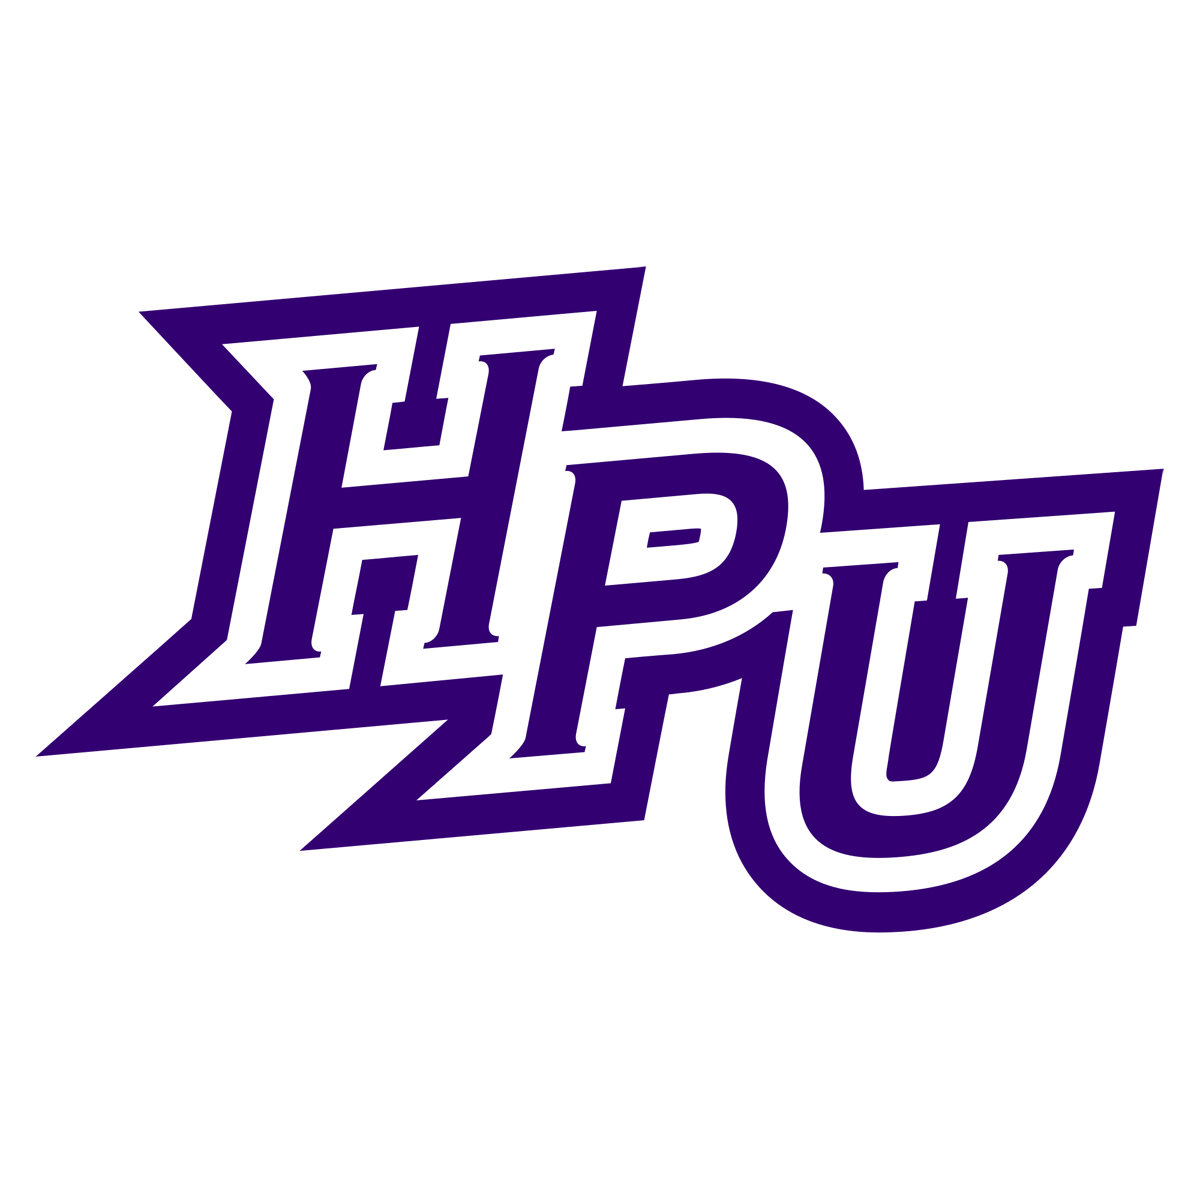 High Point Panthers logo PNG